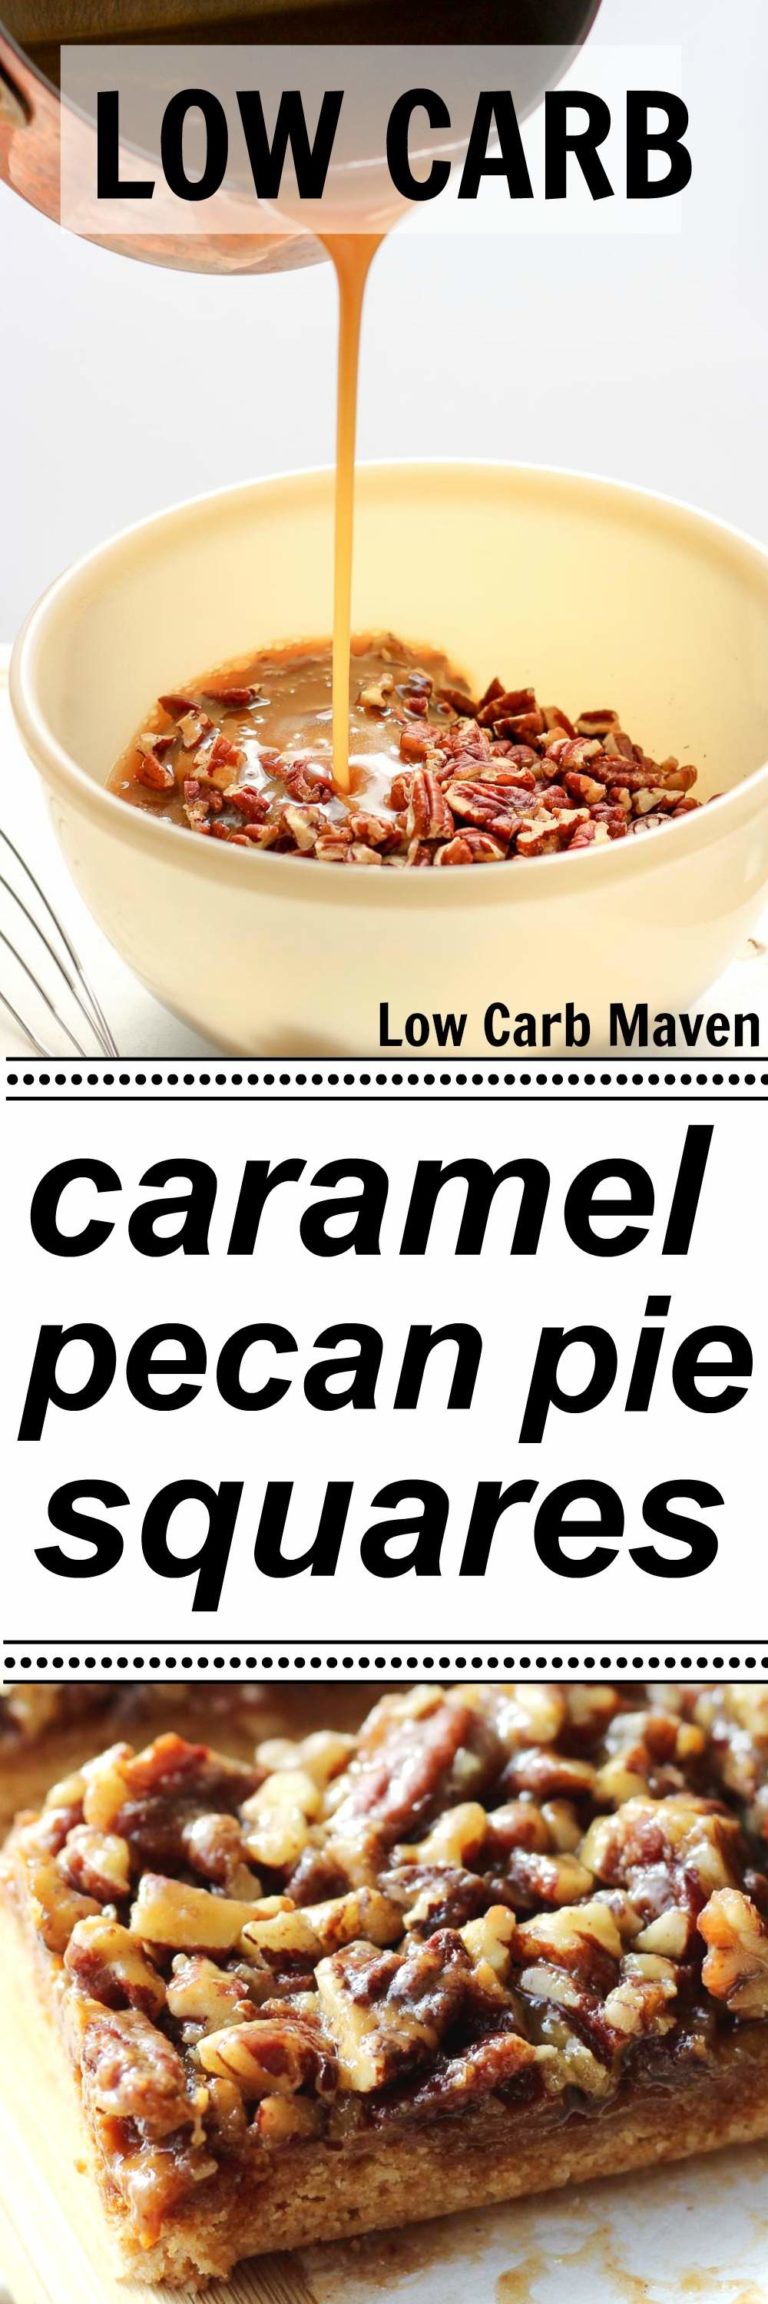 Low Carb Caramel Pecan Pie Squares are sugar free, gluten free and keto